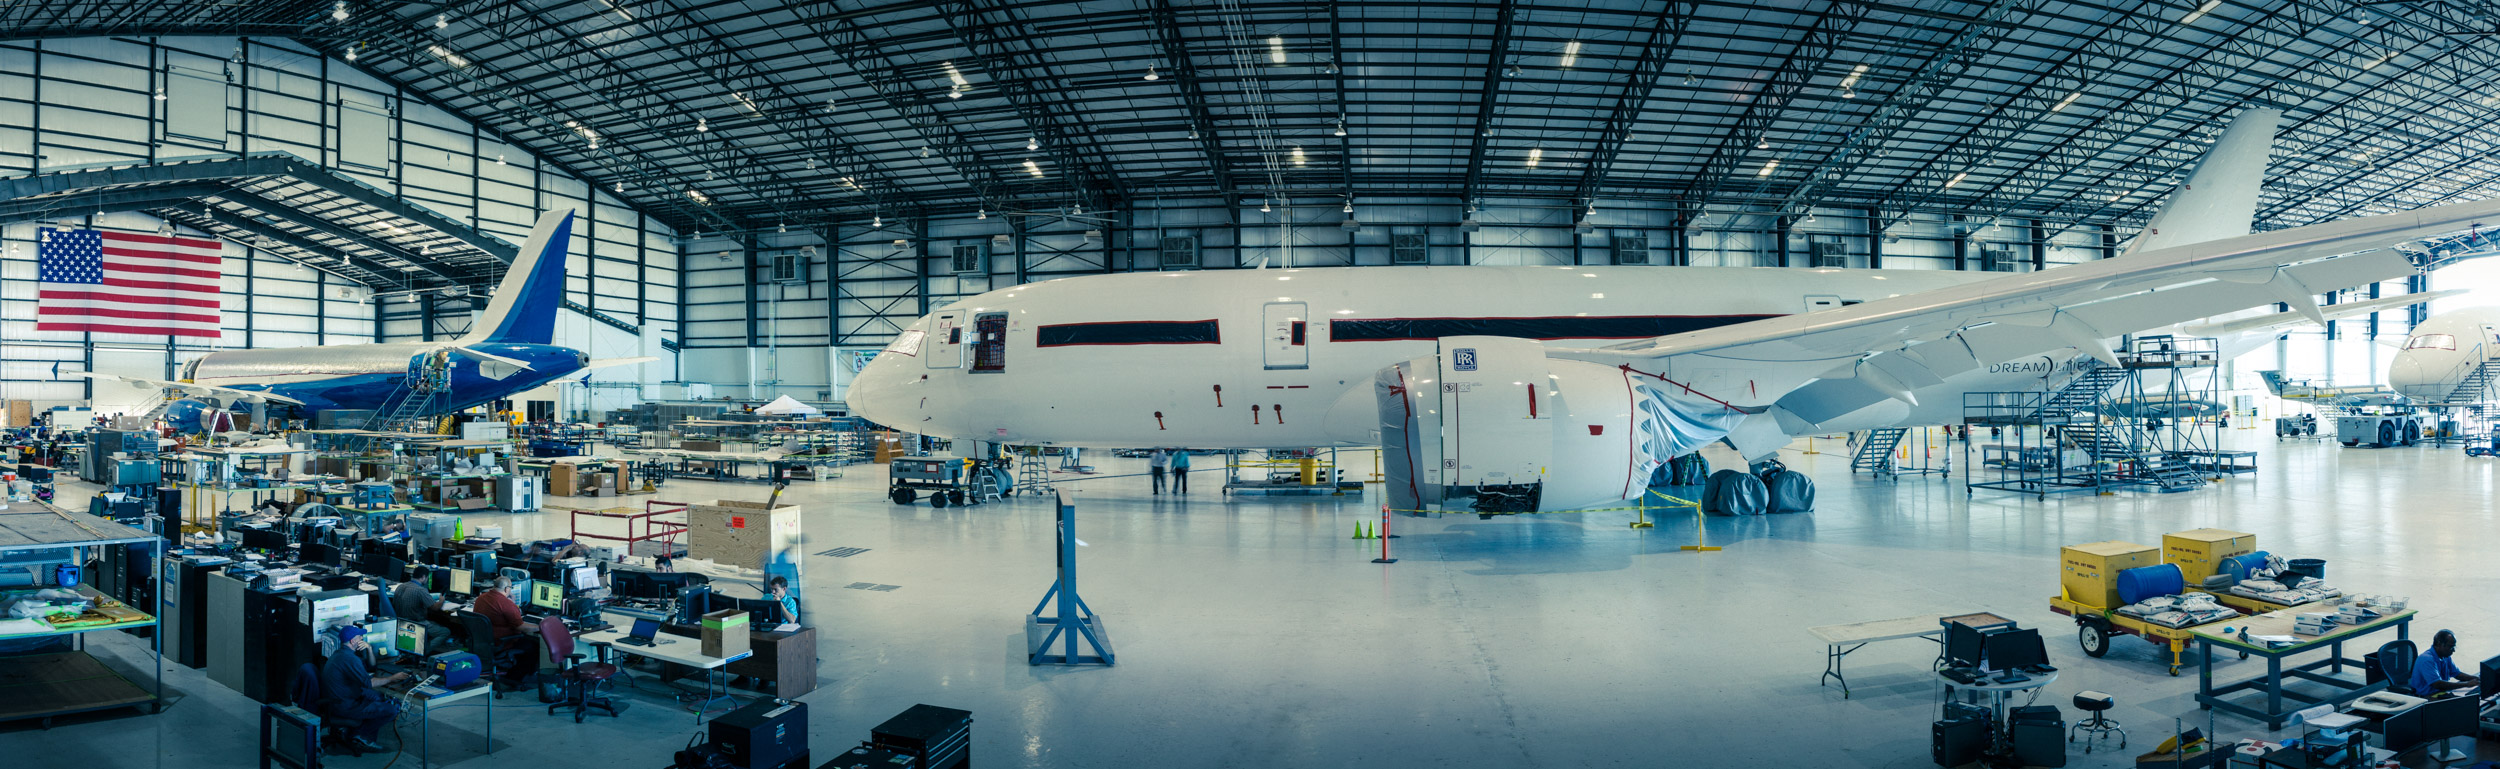 wide view of airplane in airport hangar